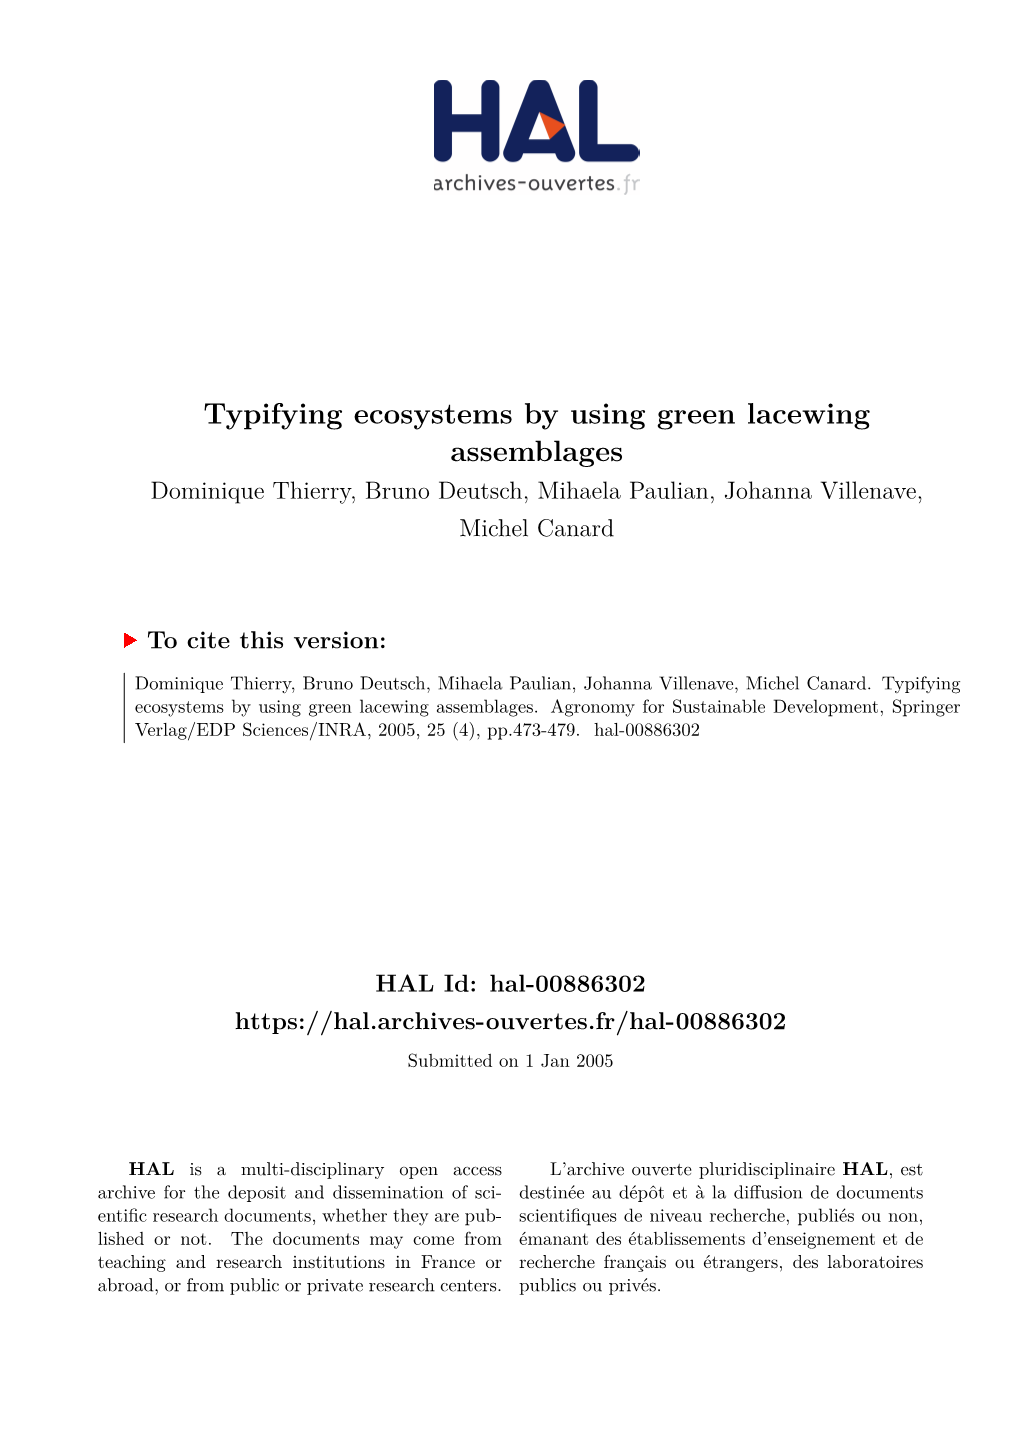 Typifying Ecosystems by Using Green Lacewing Assemblages Dominique Thierry, Bruno Deutsch, Mihaela Paulian, Johanna Villenave, Michel Canard